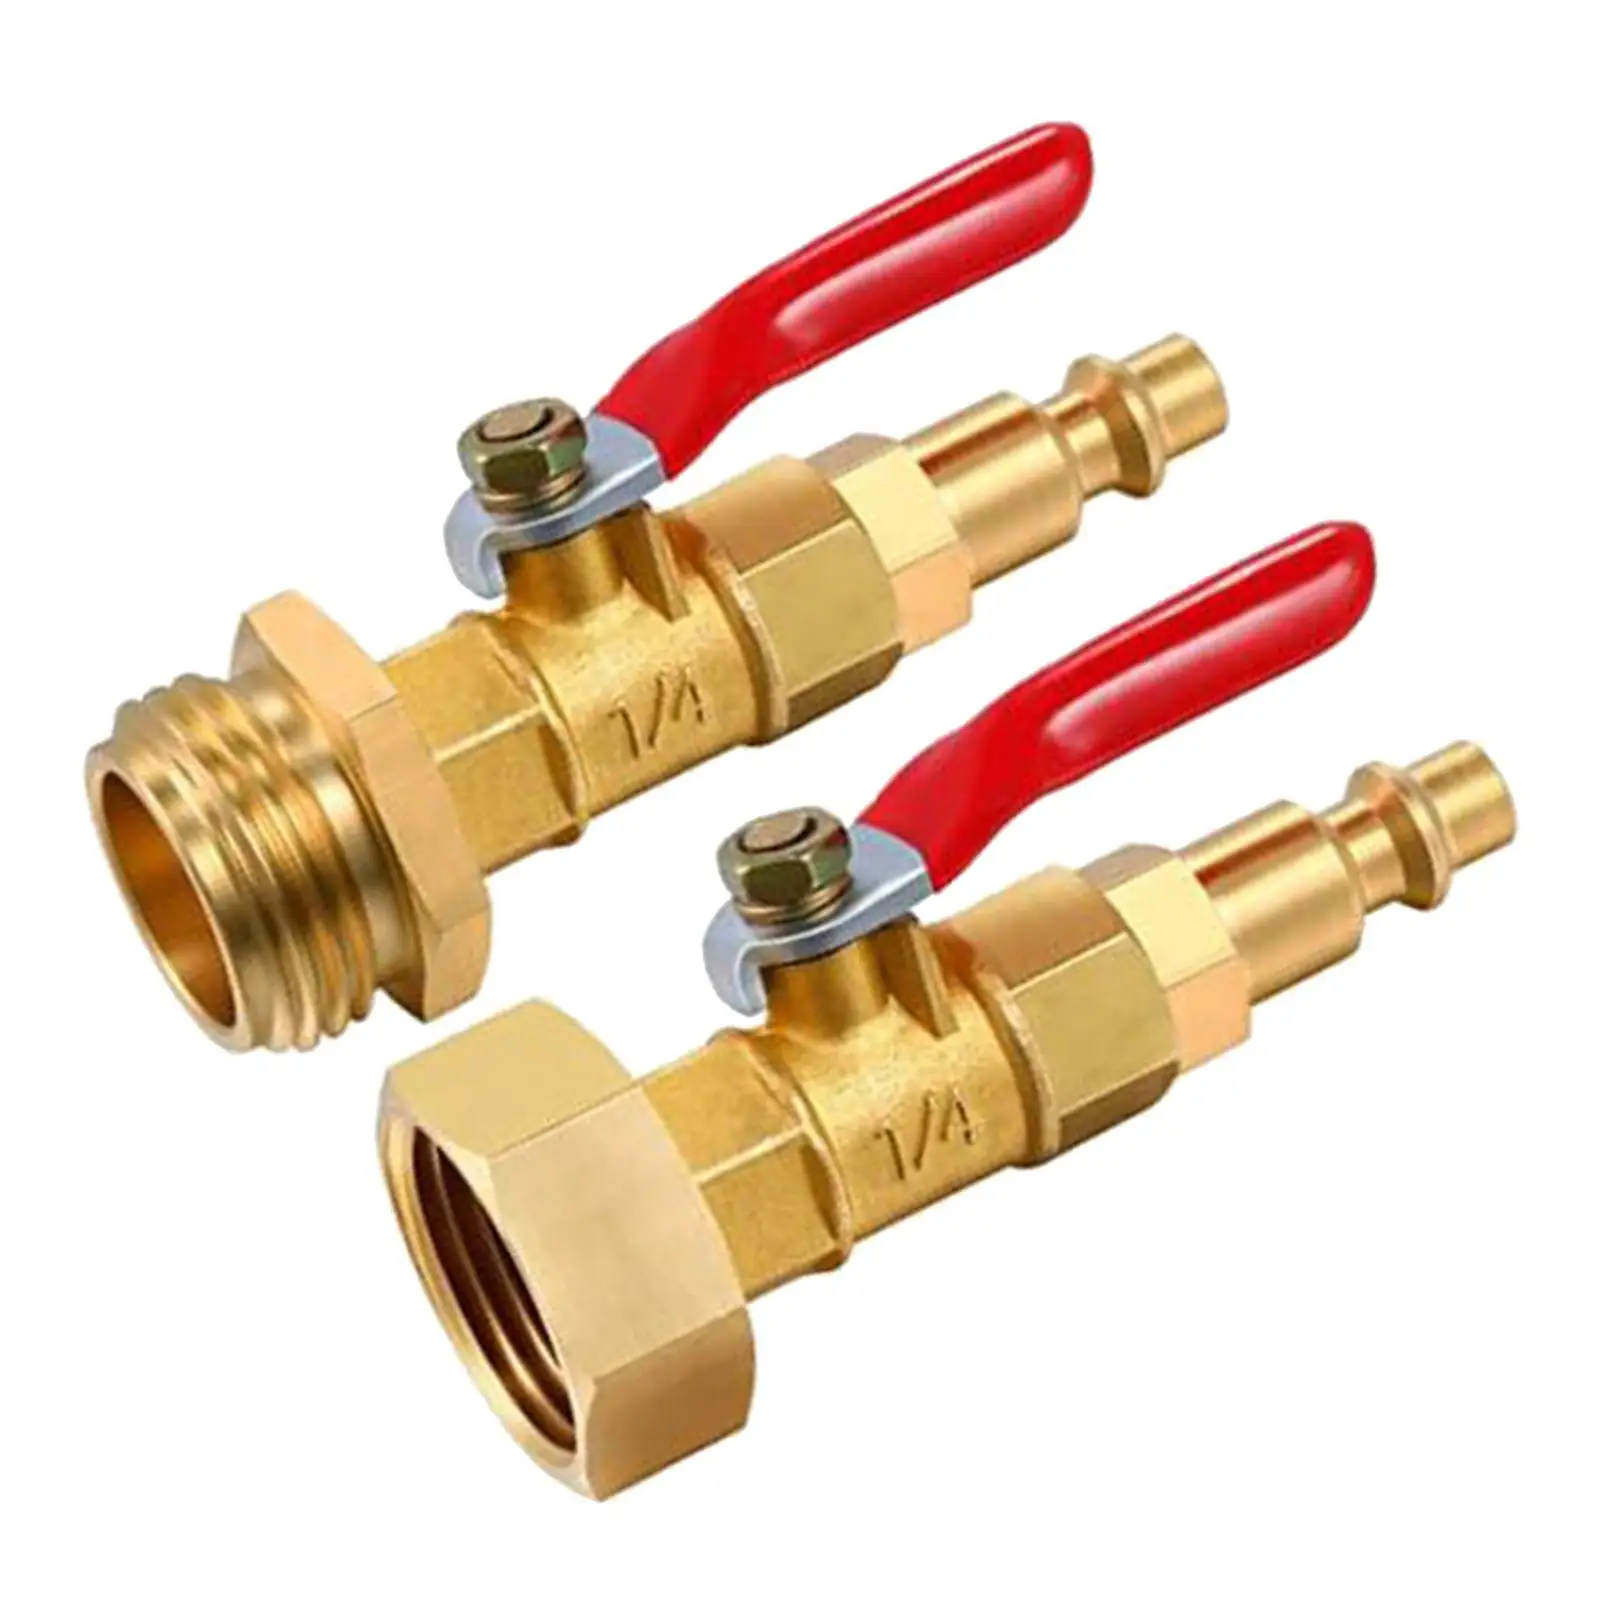 Winterize Blowout Adapter with 1/4 Inch  Connecting Plug and 3/4 Inch Male GHT Thread, Brass Winterizing Quick Adapter with 